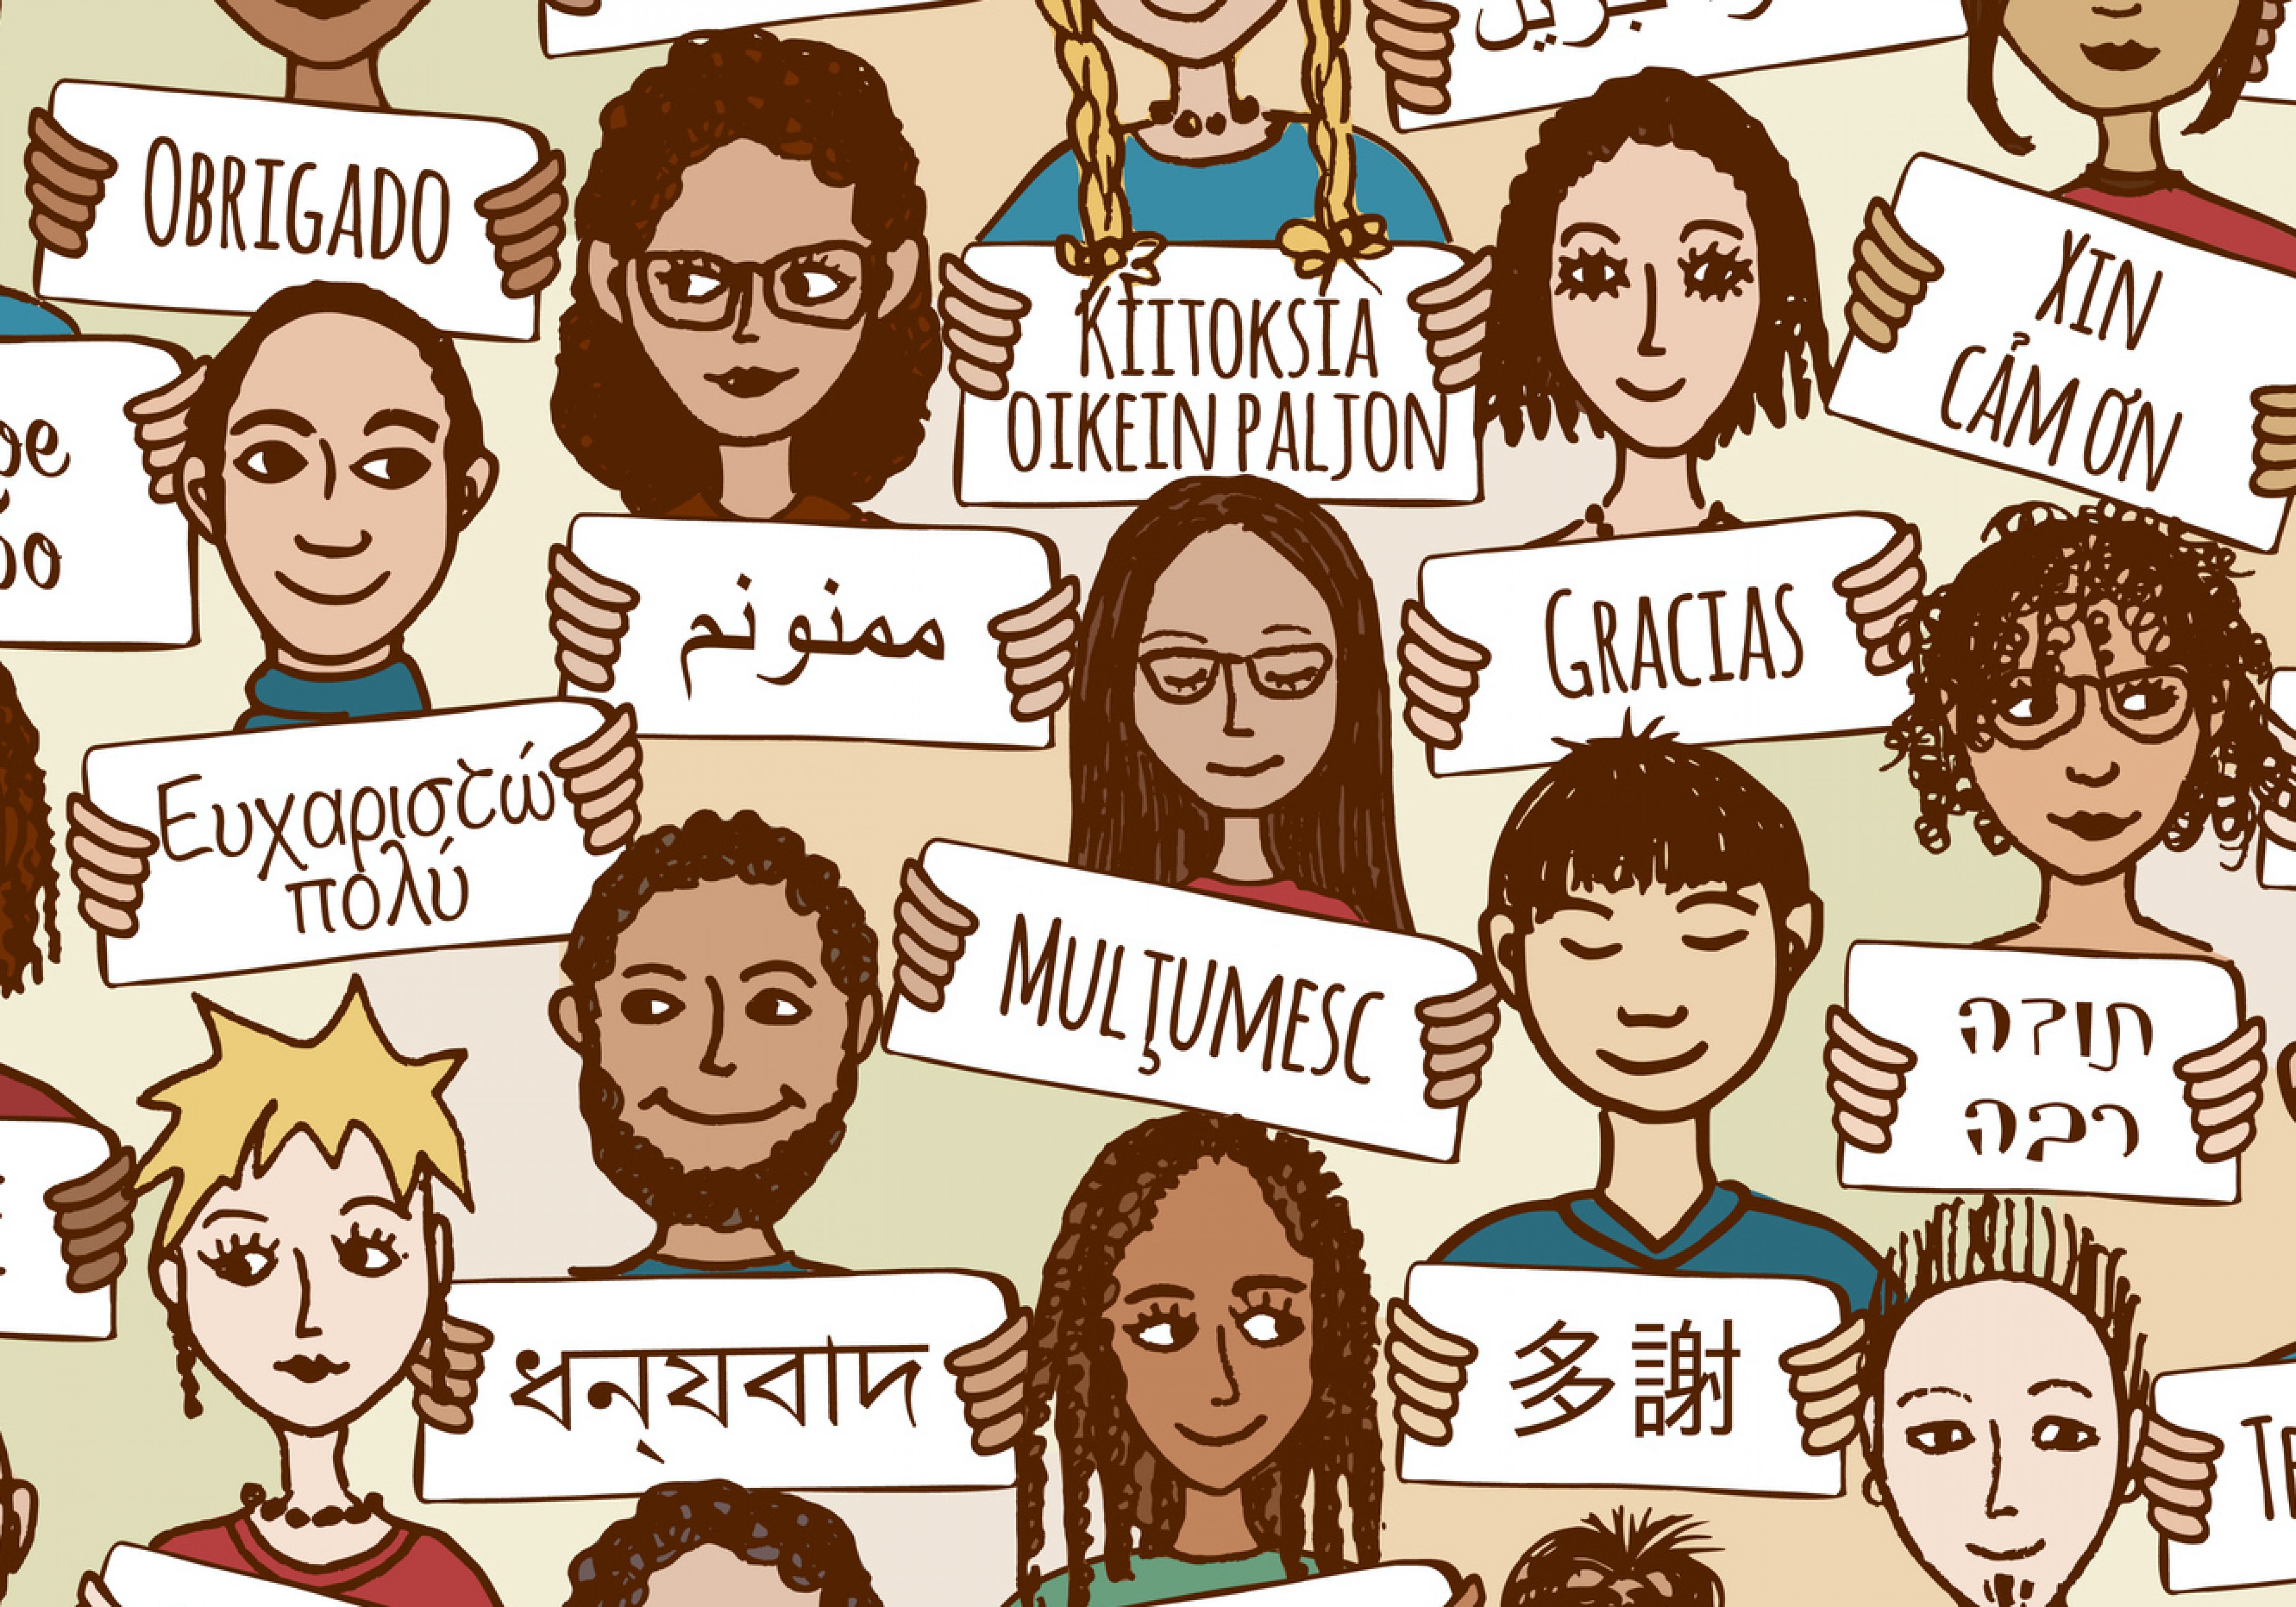 Seamless pattern of a group of hand drawn people holding "thank you" signs in different languages